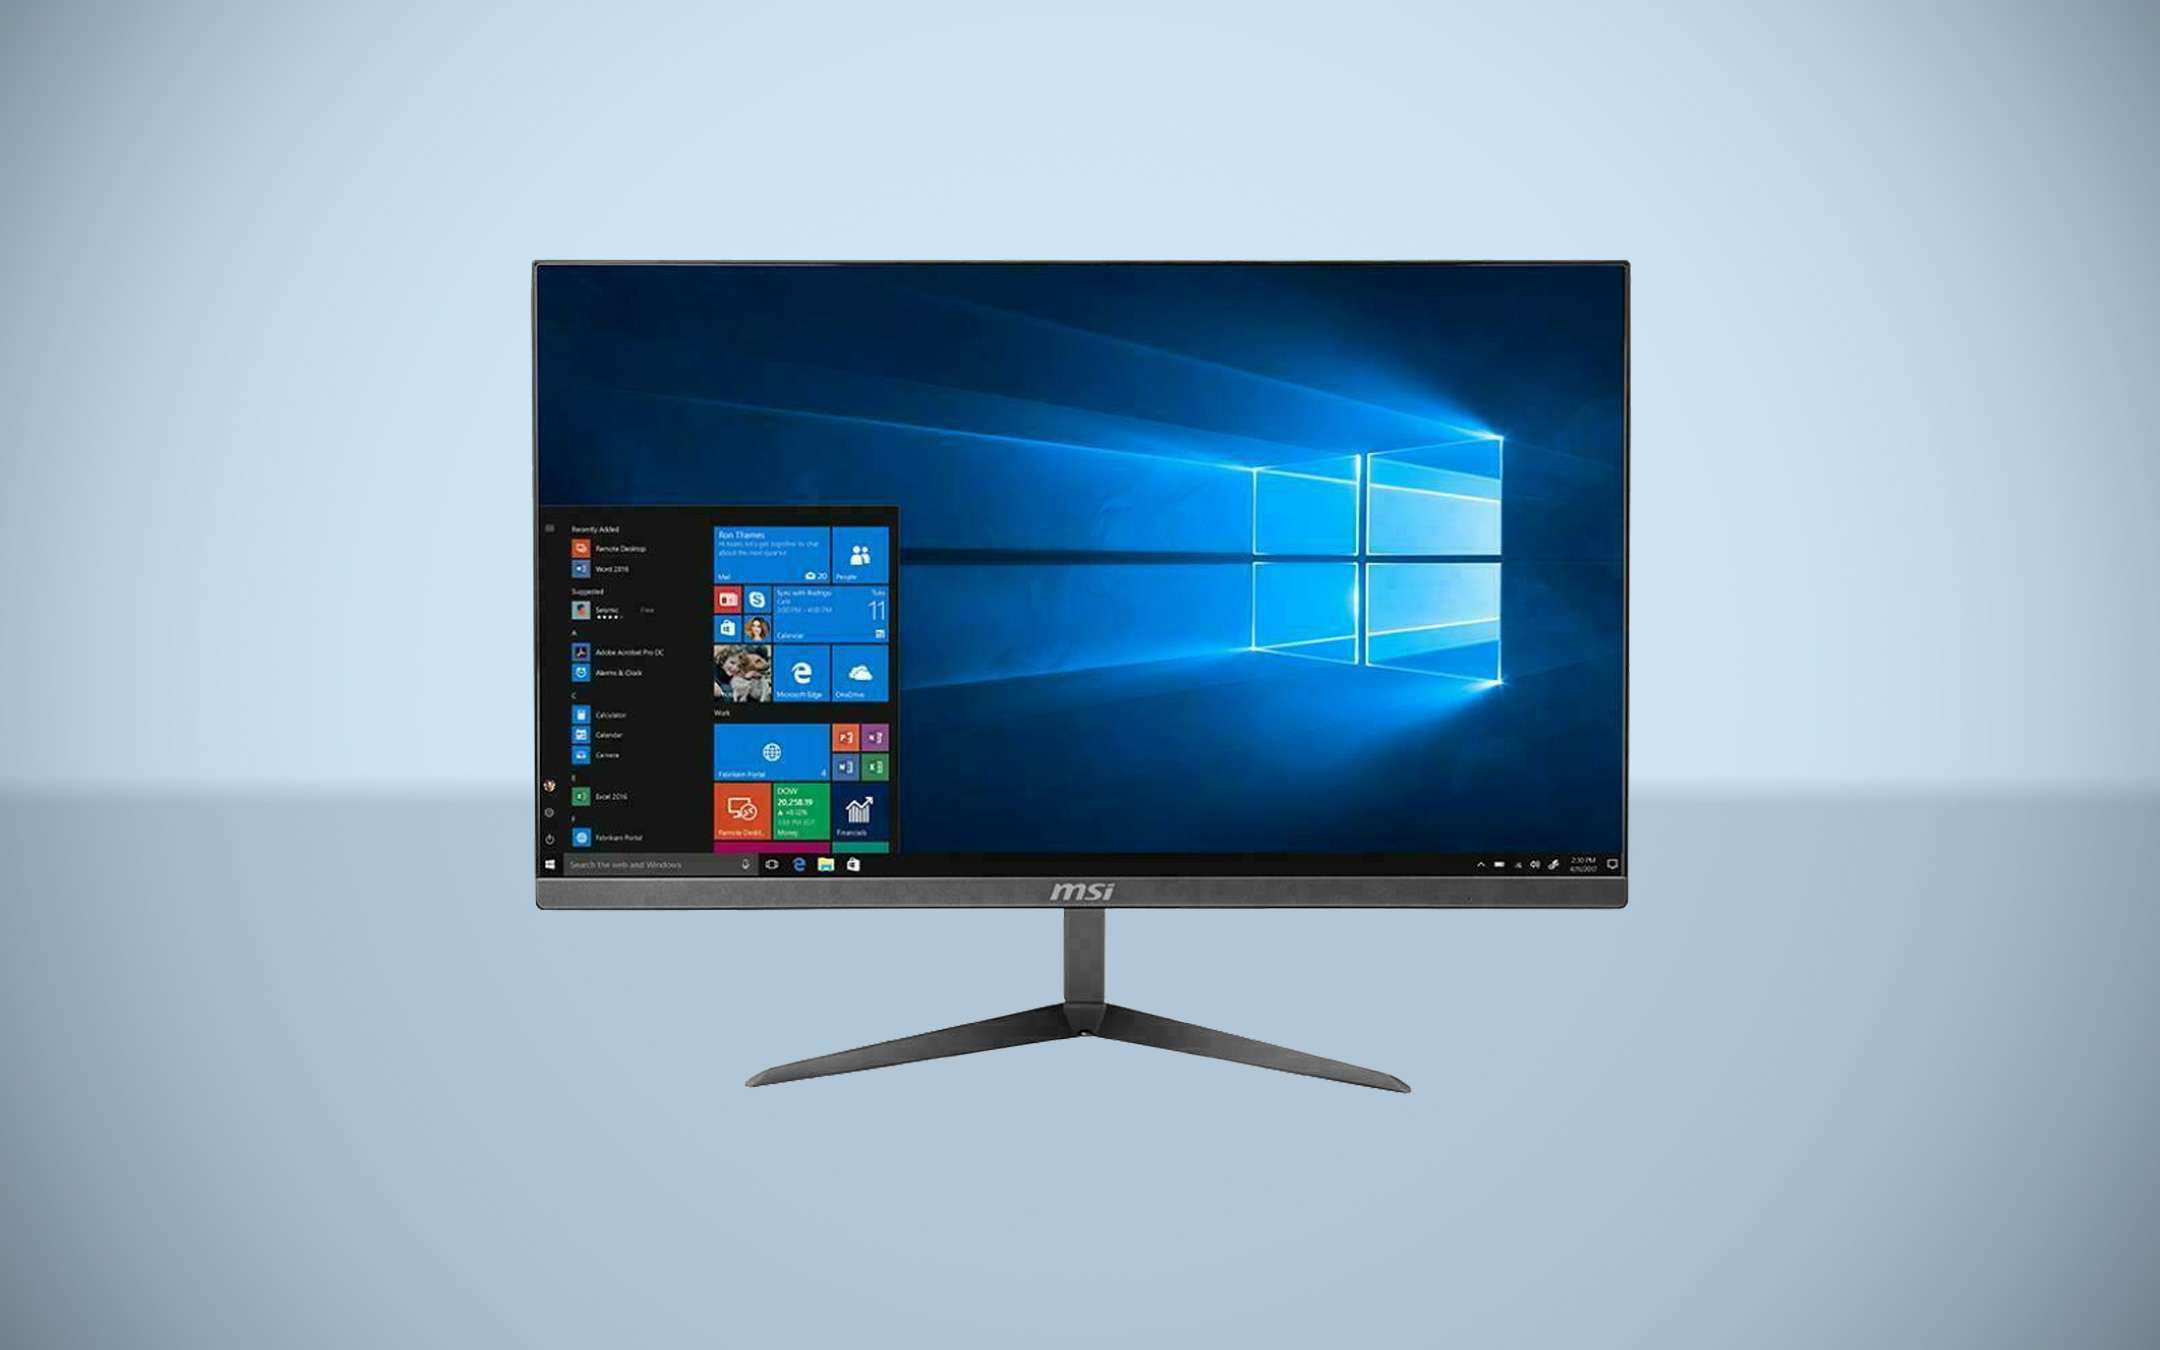 X con. MSI Pro mp243 24-inch. MSI all in one PC 24 display.